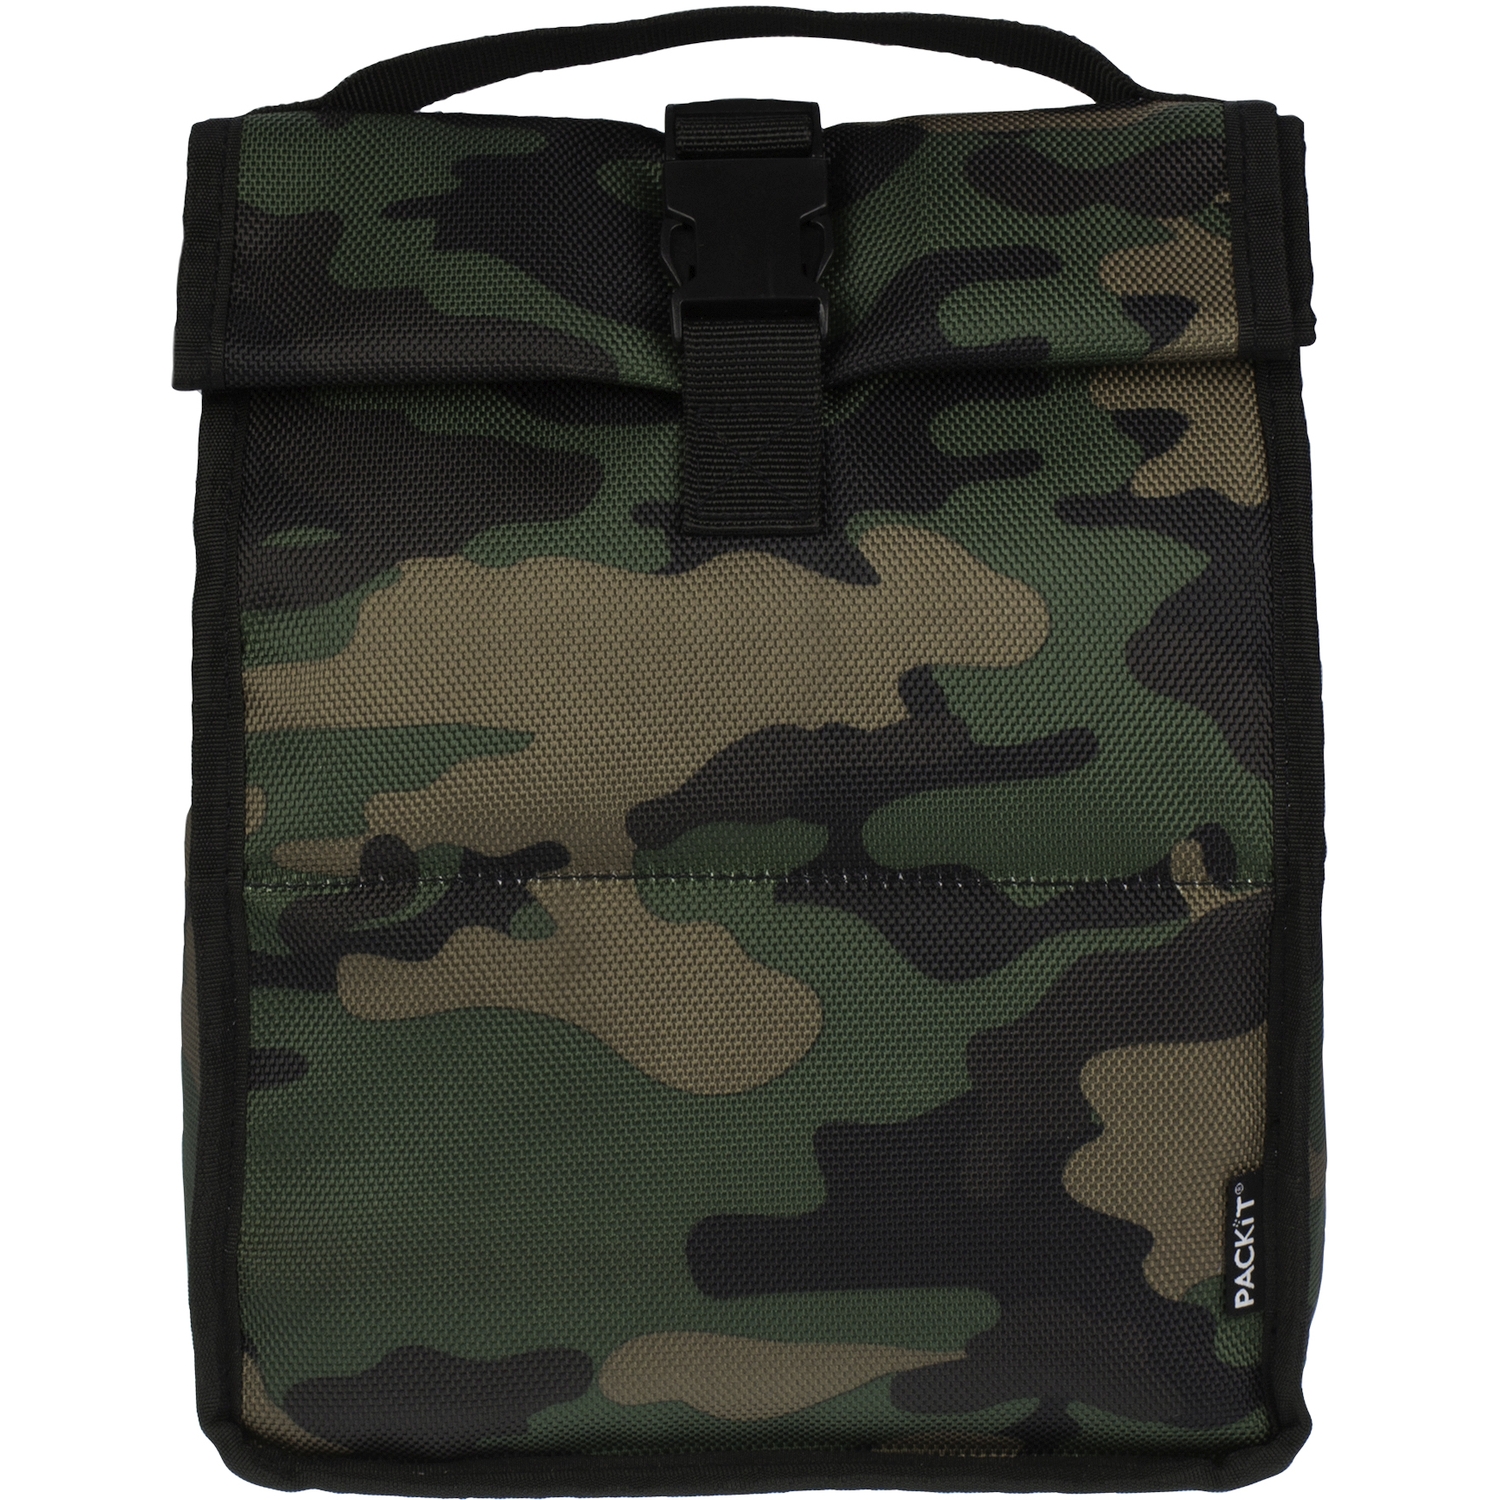     Roll Top Camo, 4.4  (PACKiT PACKIT0036)